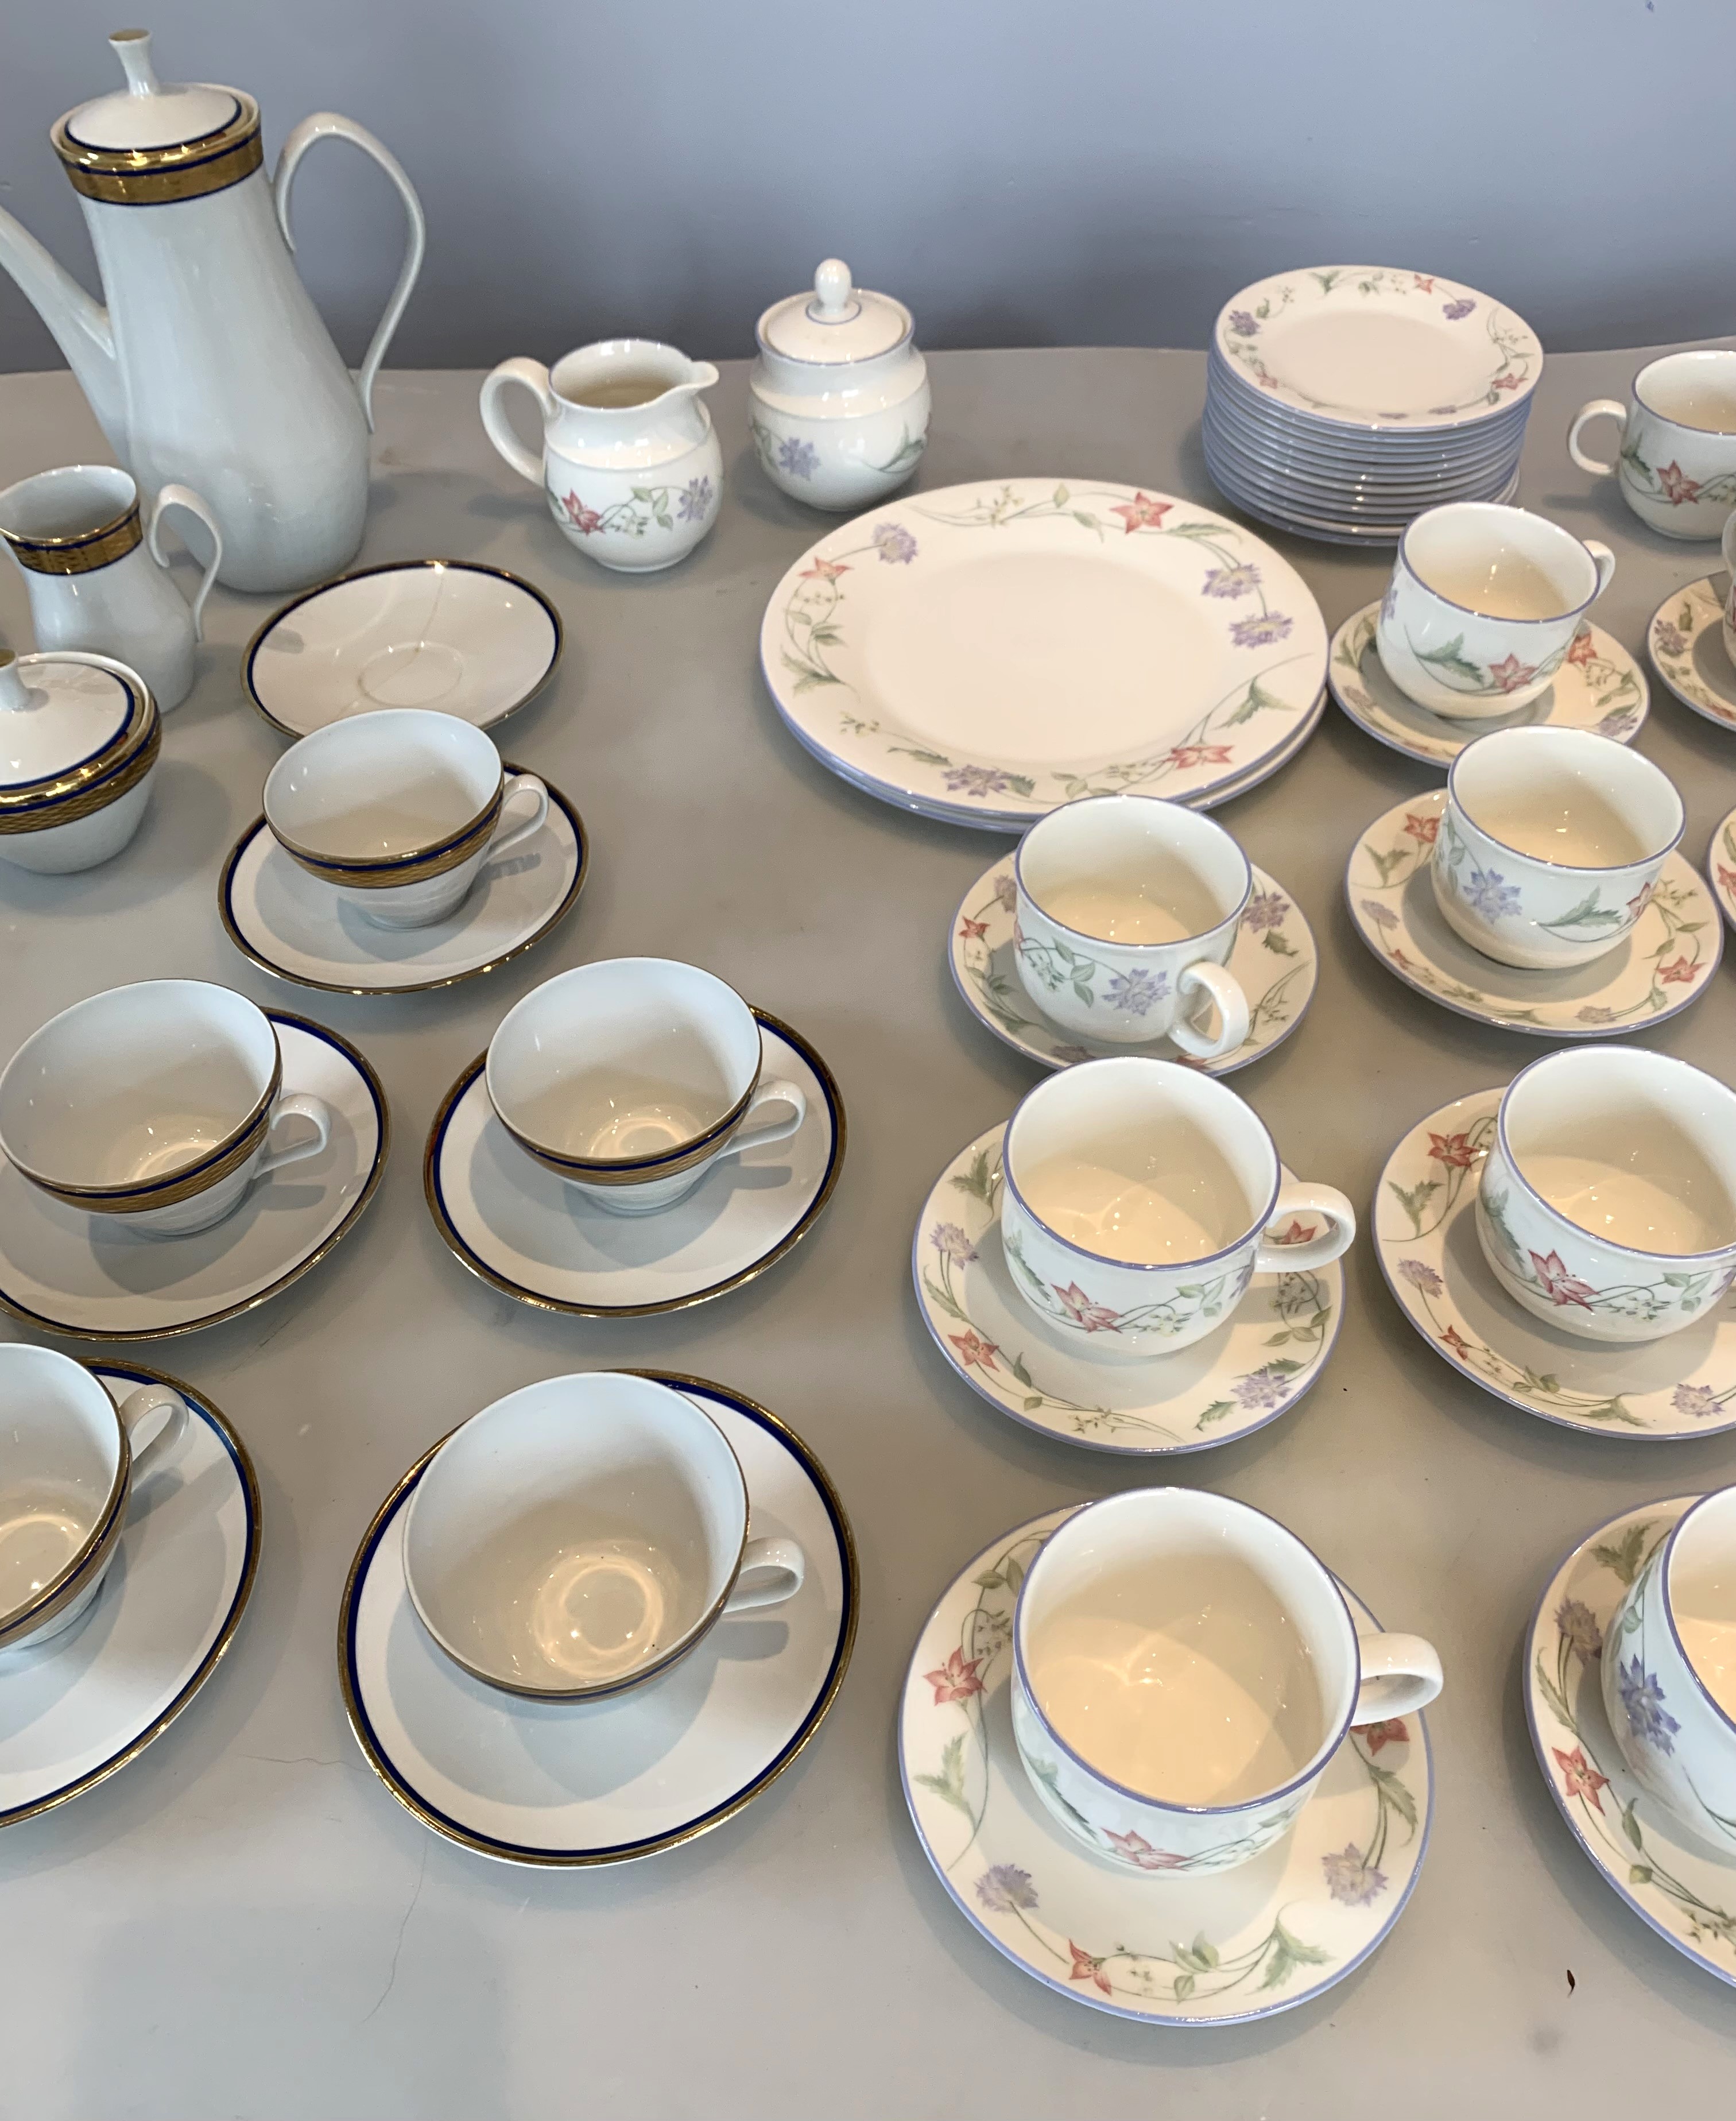 3 tea, coffee and dinner sets - Image 8 of 14